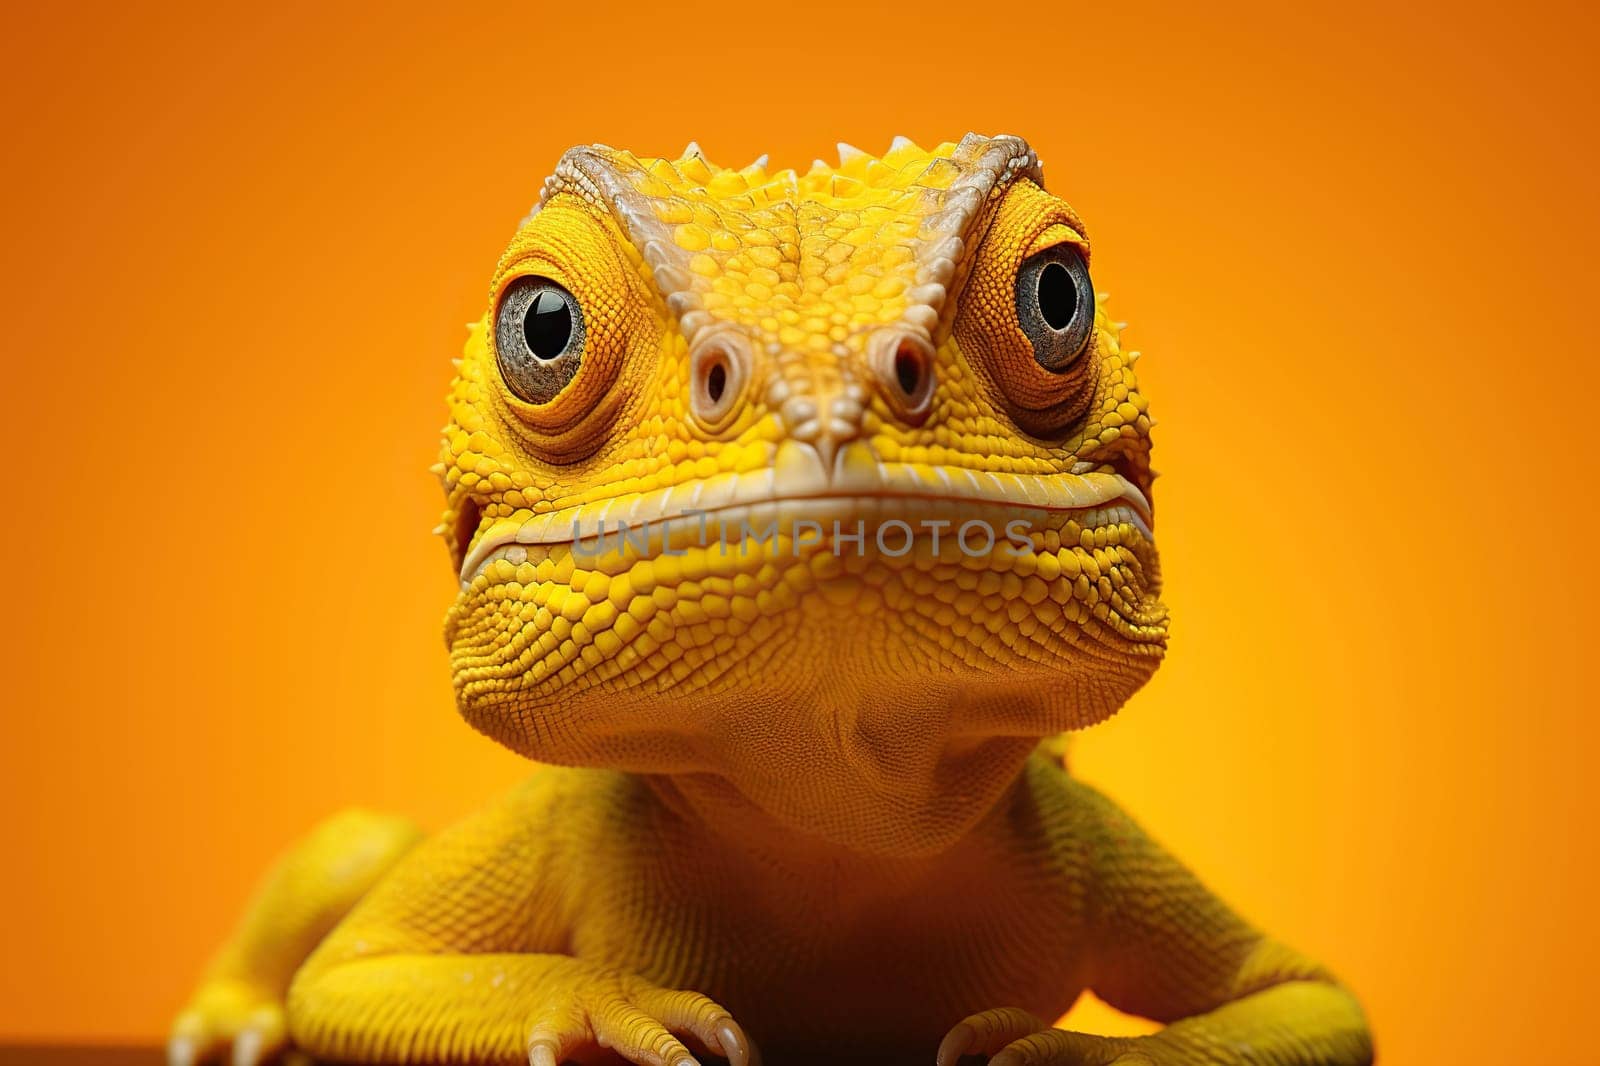 Bright yellow chameleon on a yellow background.